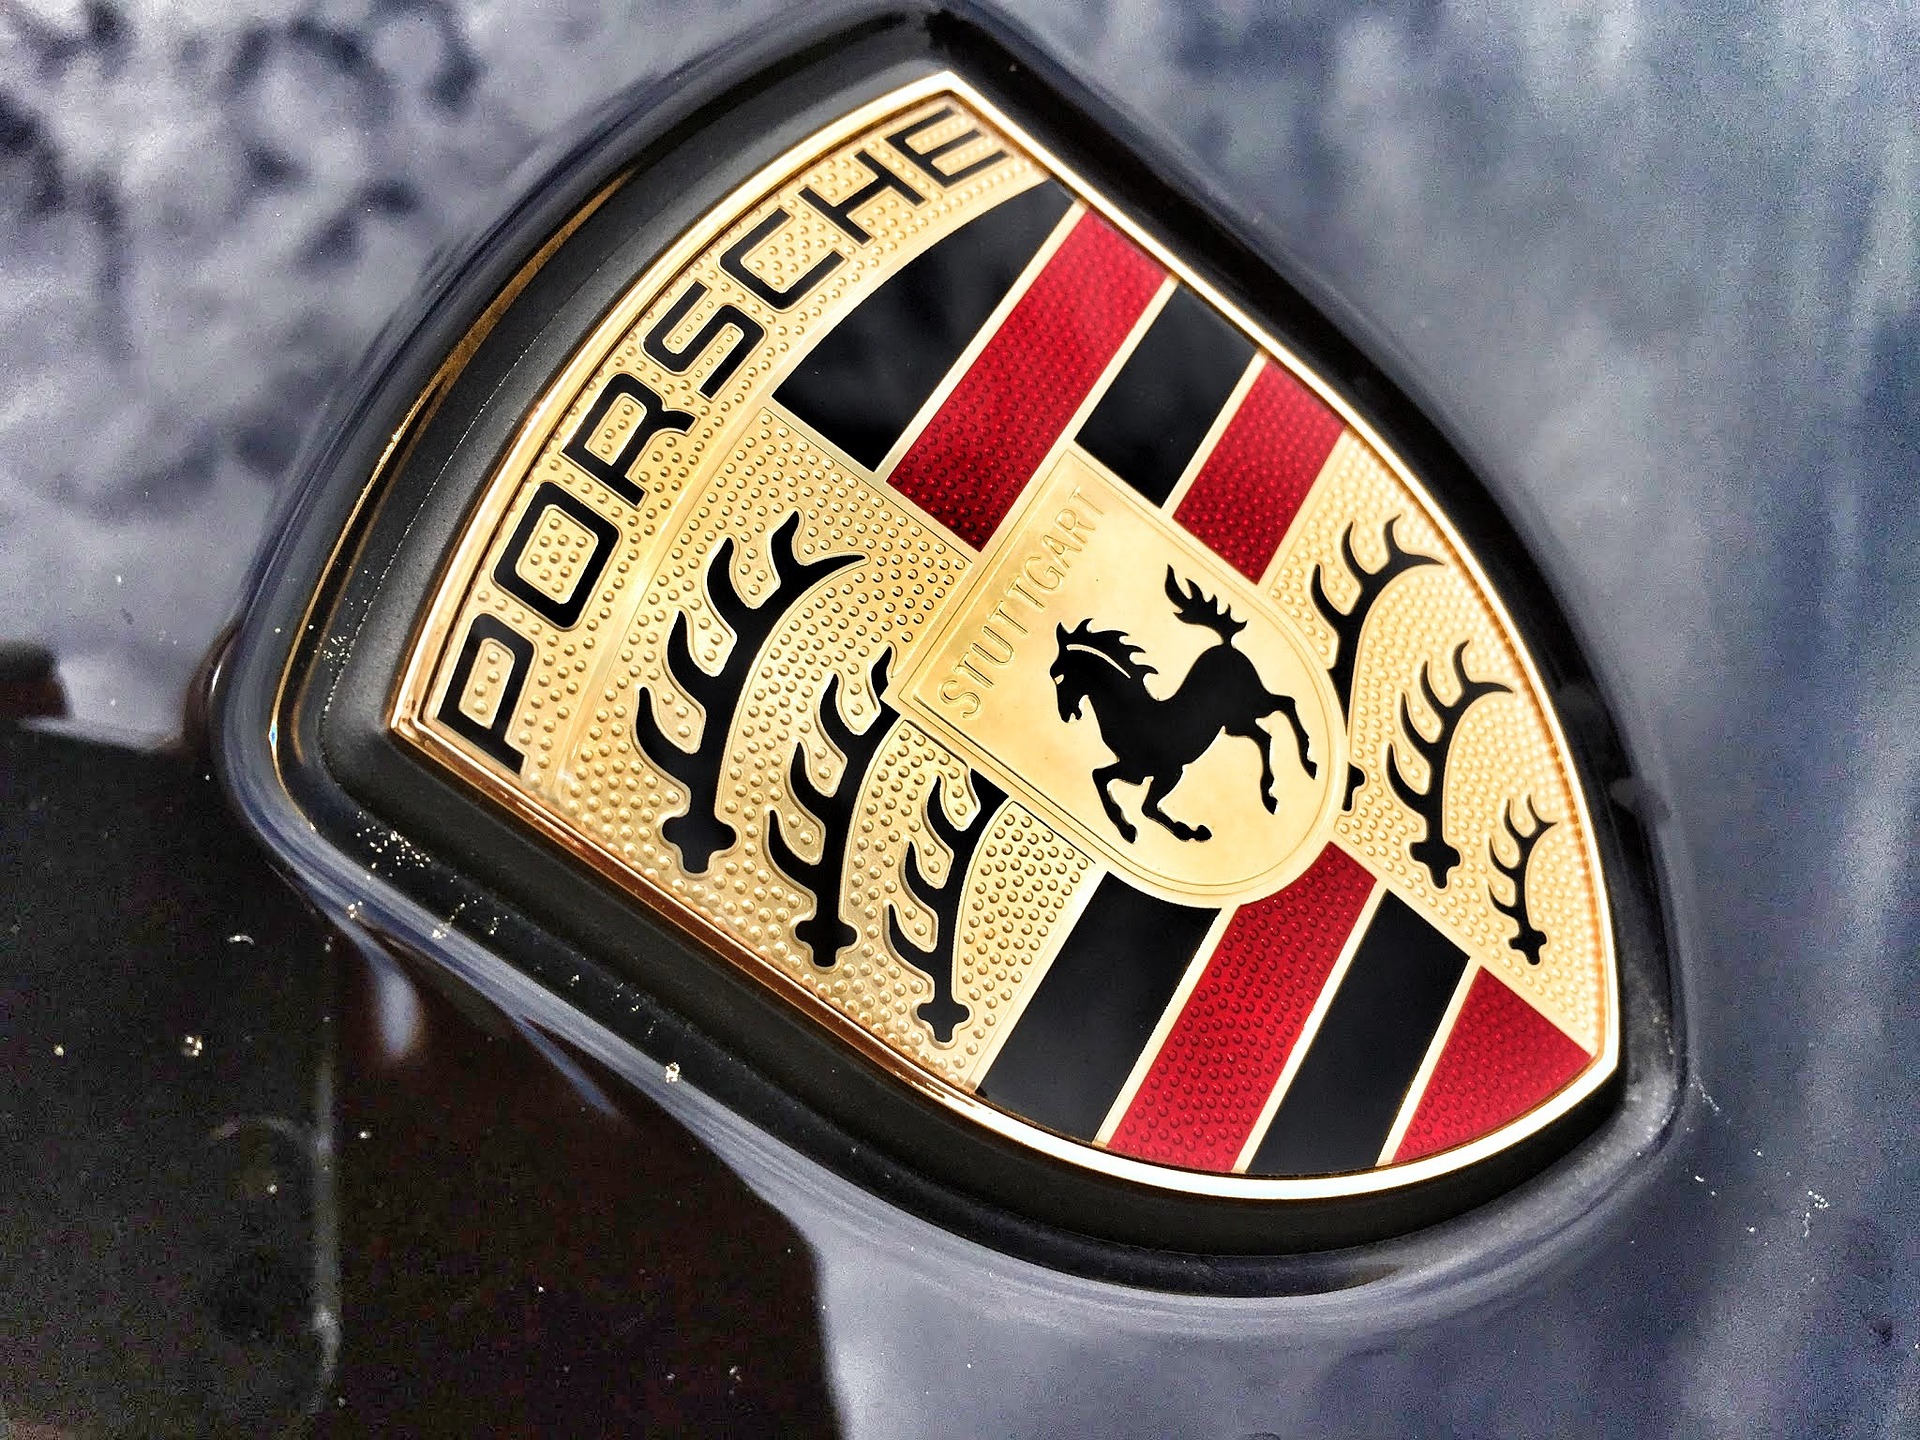 Close-up of the Porsche emblem on the front of a vehicle